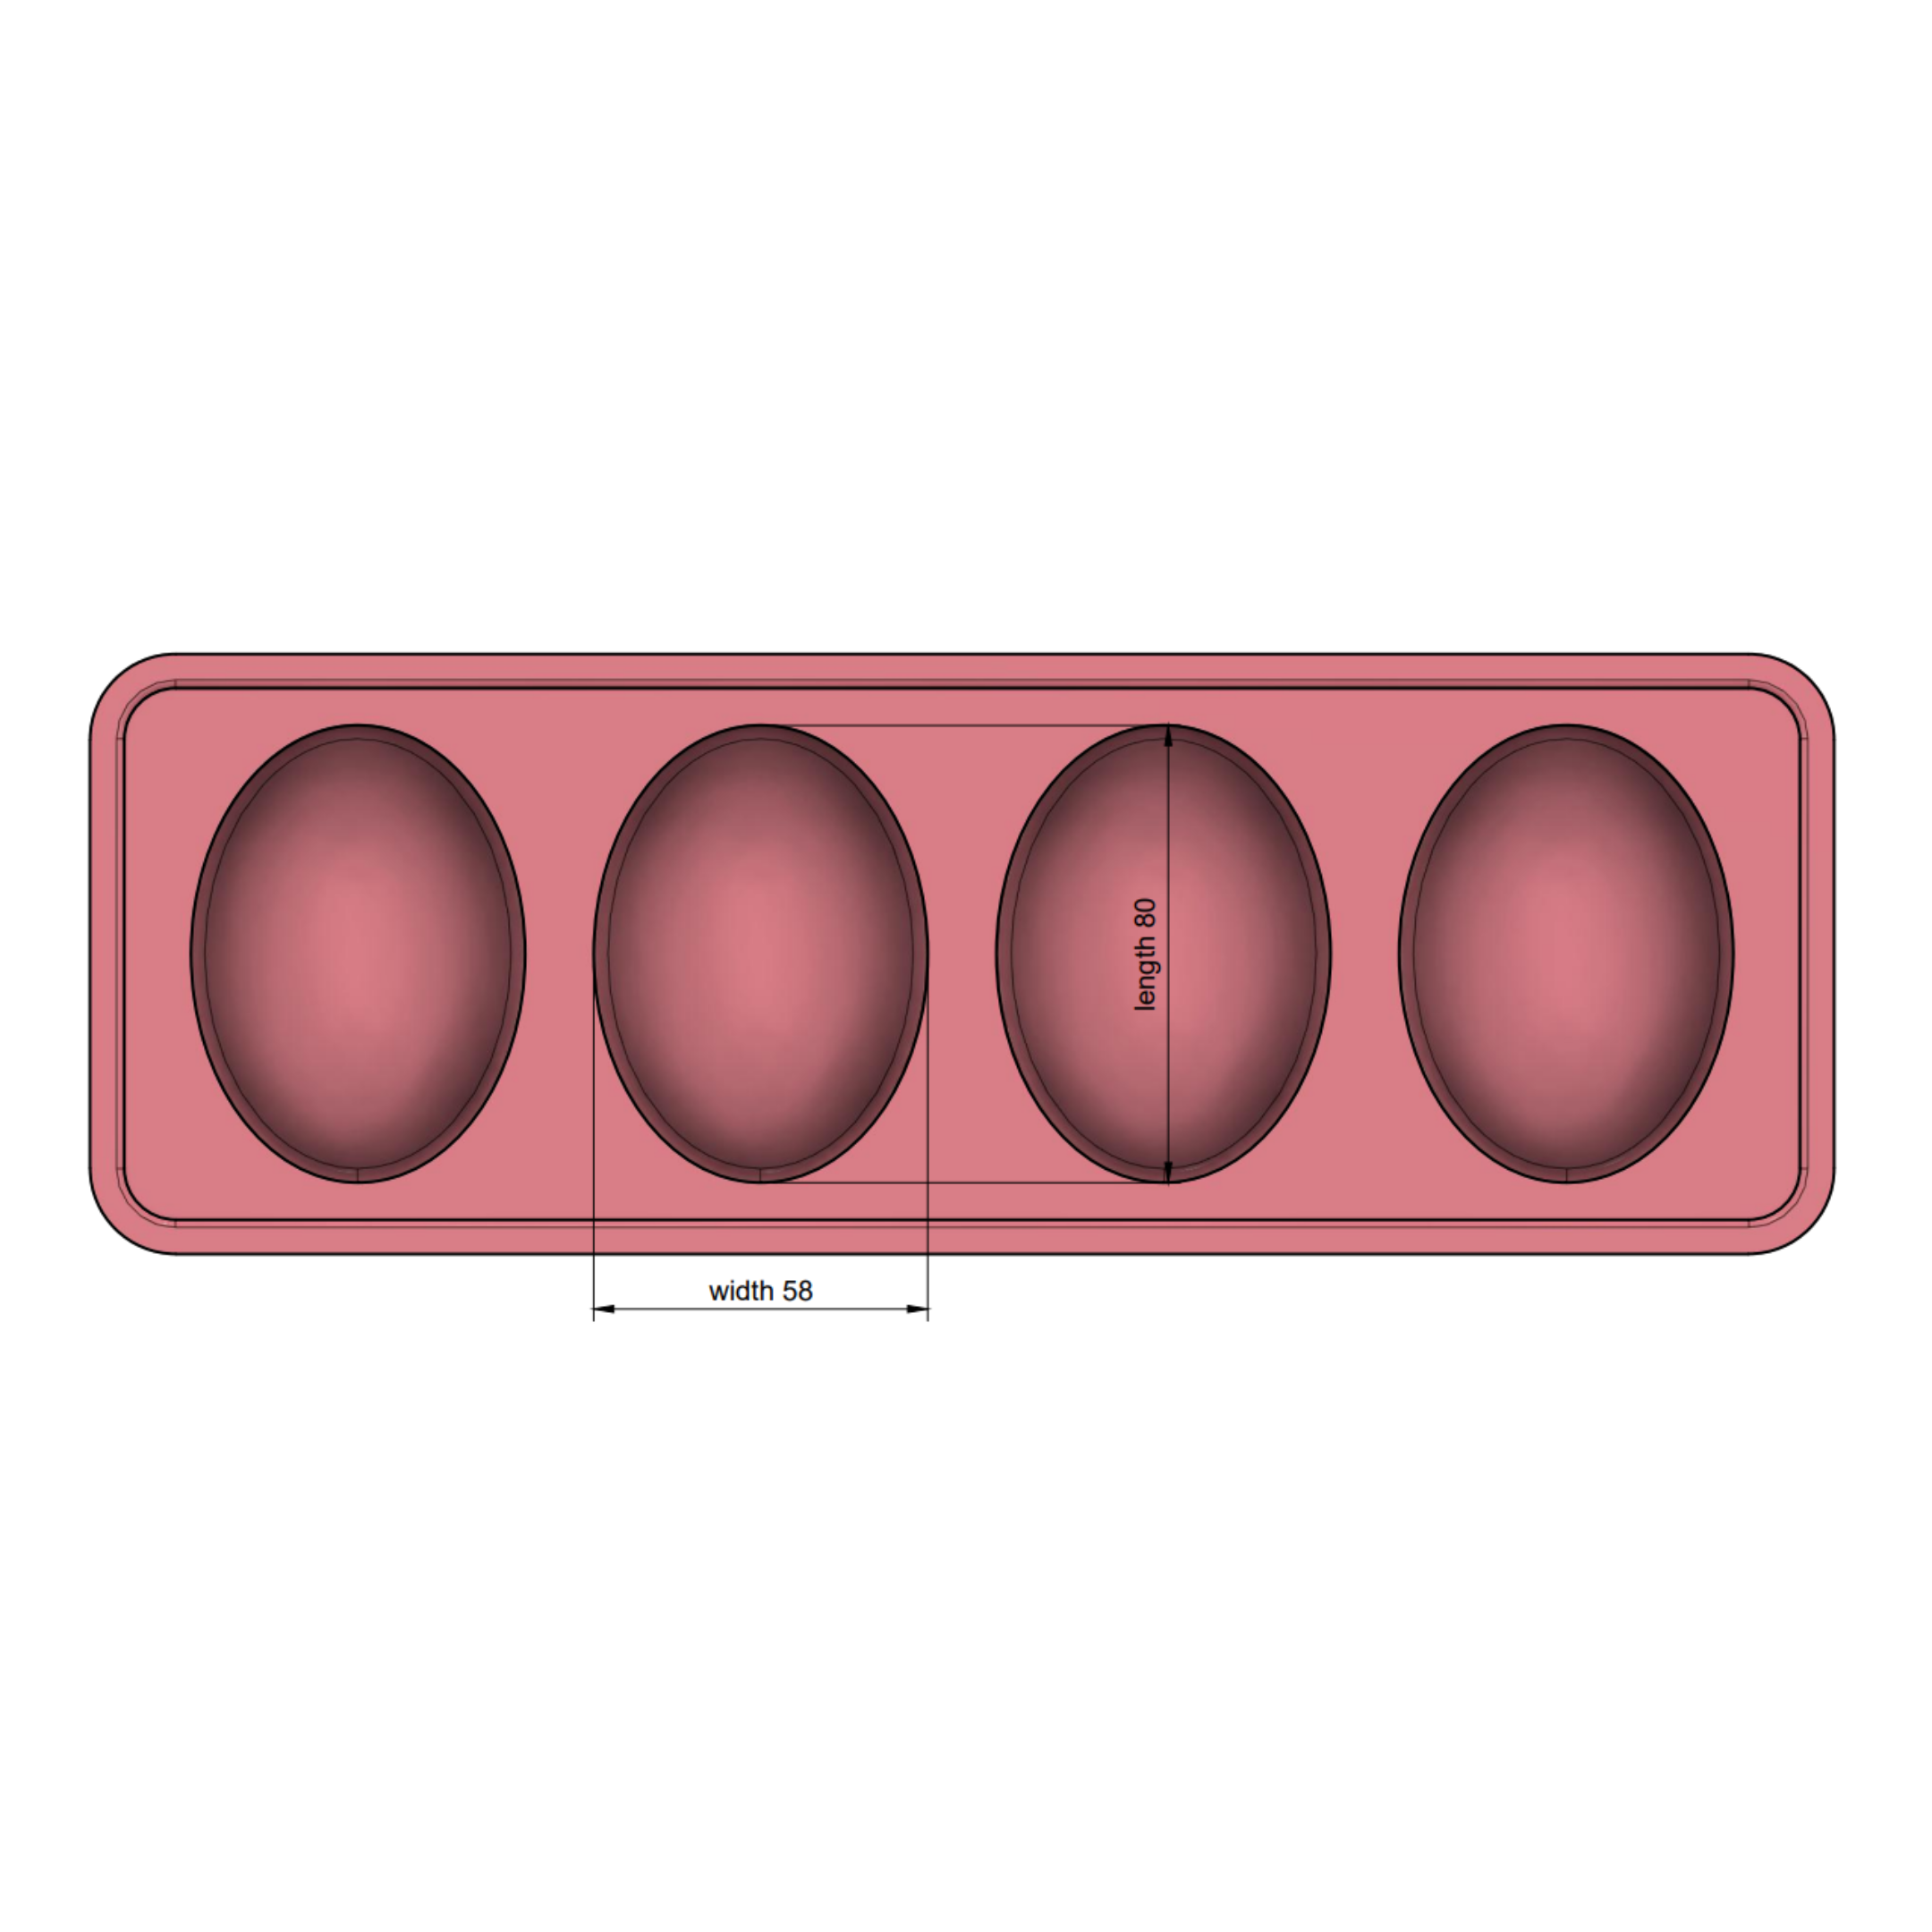 100ml Oval Soap Mould - The Mould Story